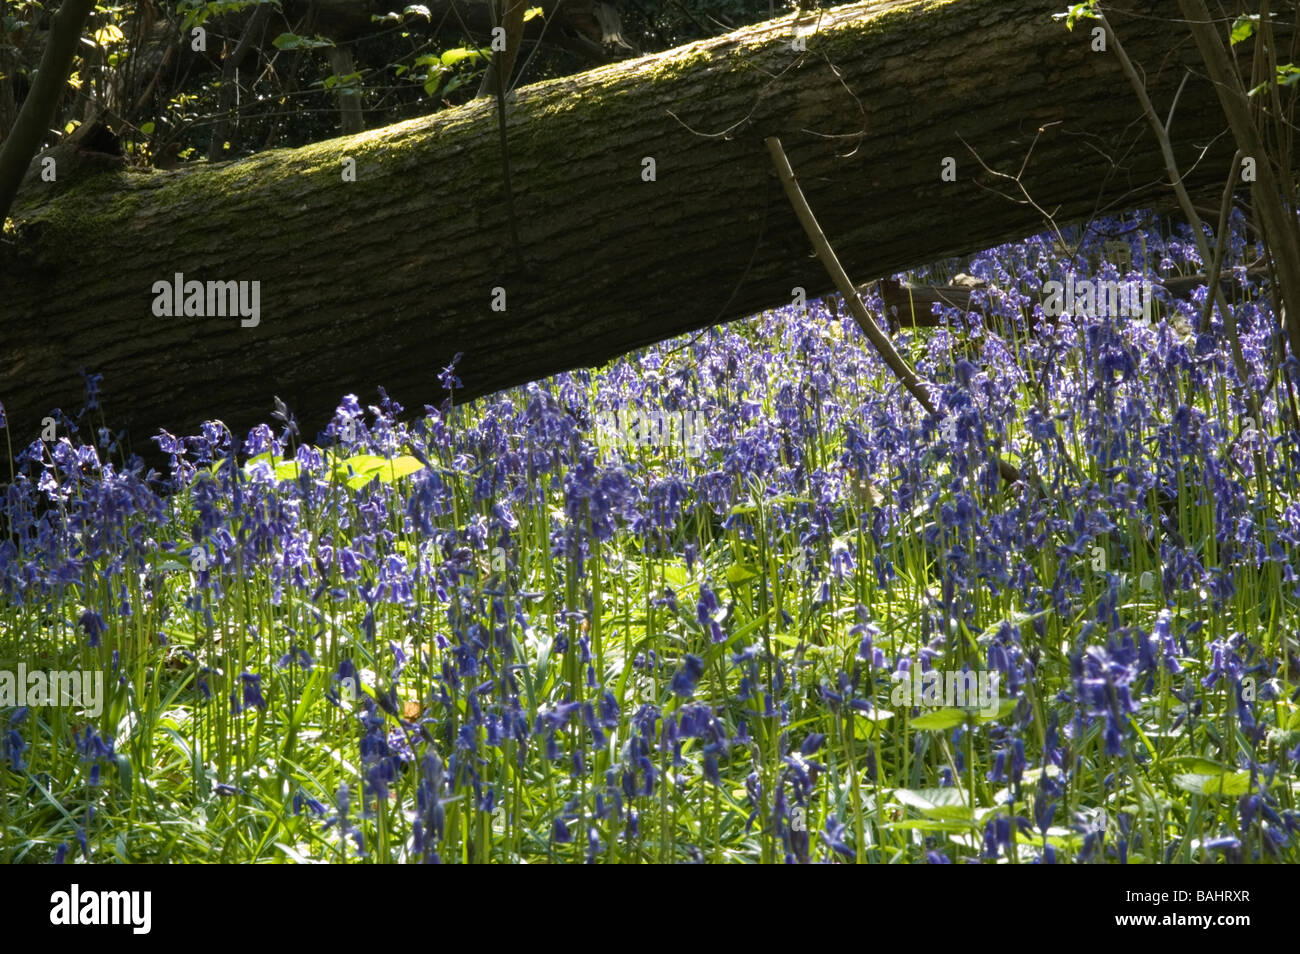 Bluebells (Hyacinthoides non-scripta) surround a fallen tree in a wood in Kent, England. Stock Photo